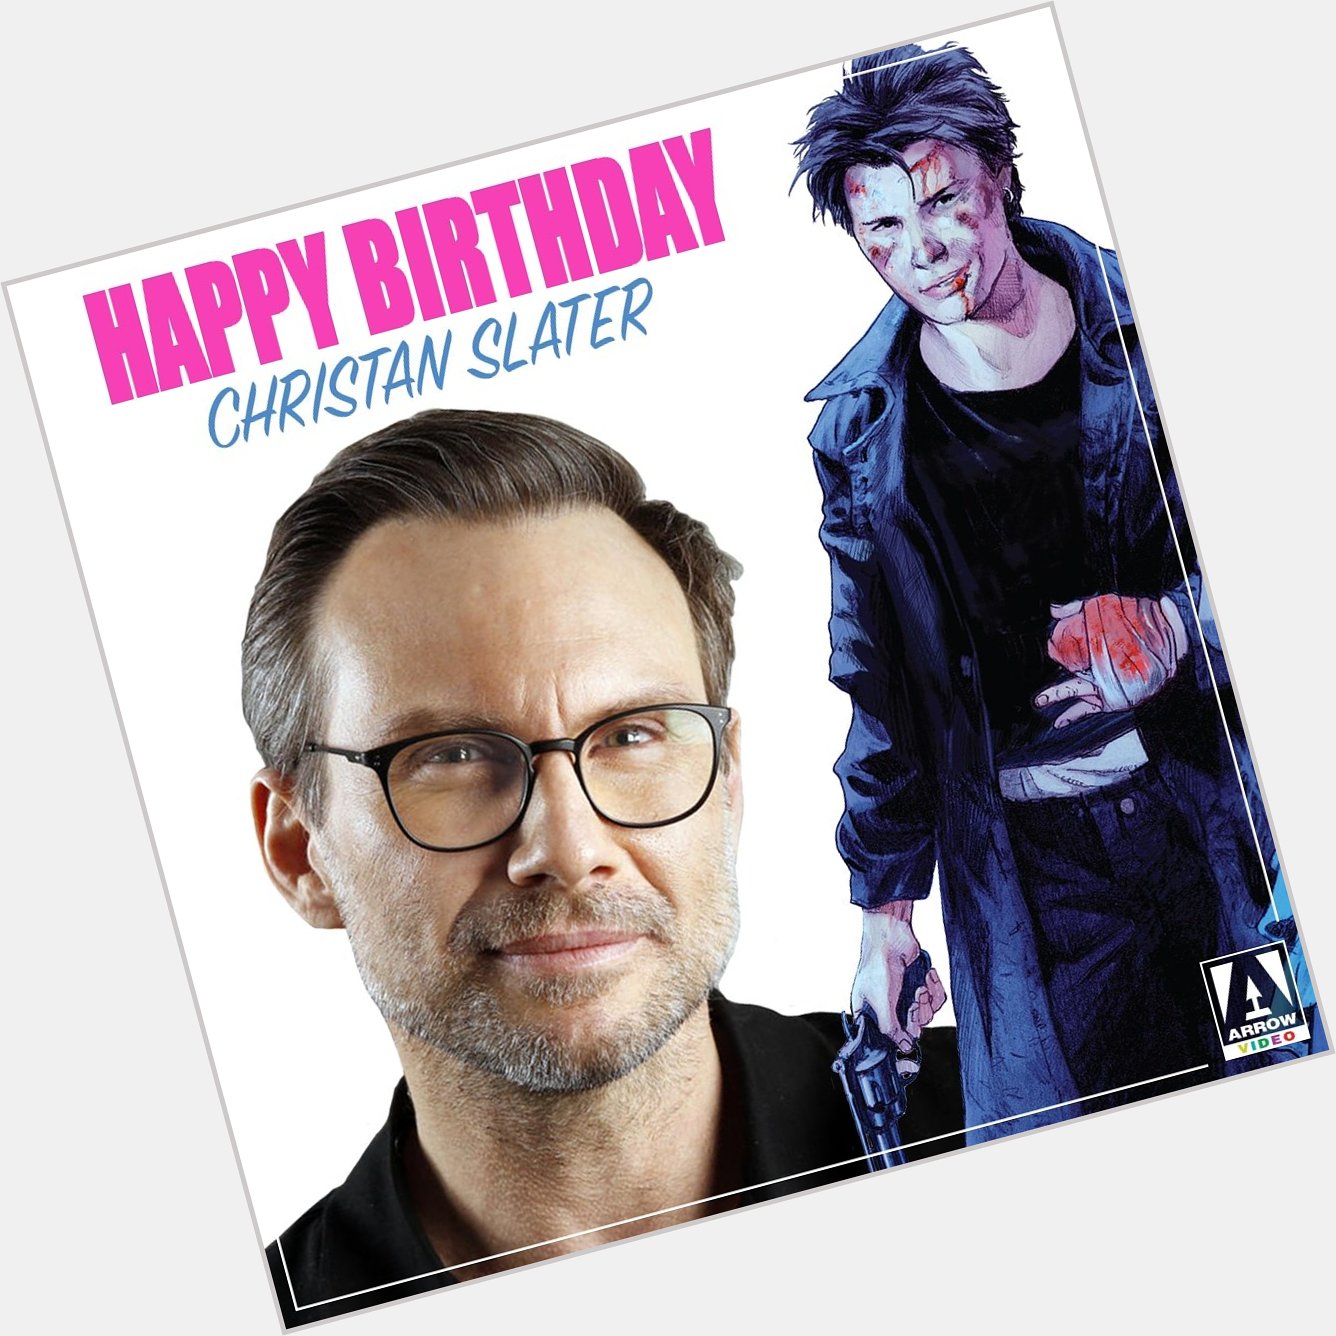 \"We\re what killed the dinosaurs\" - J.D.

Happy Birthday to the HEATHERS bad boy, Christian Slater! 